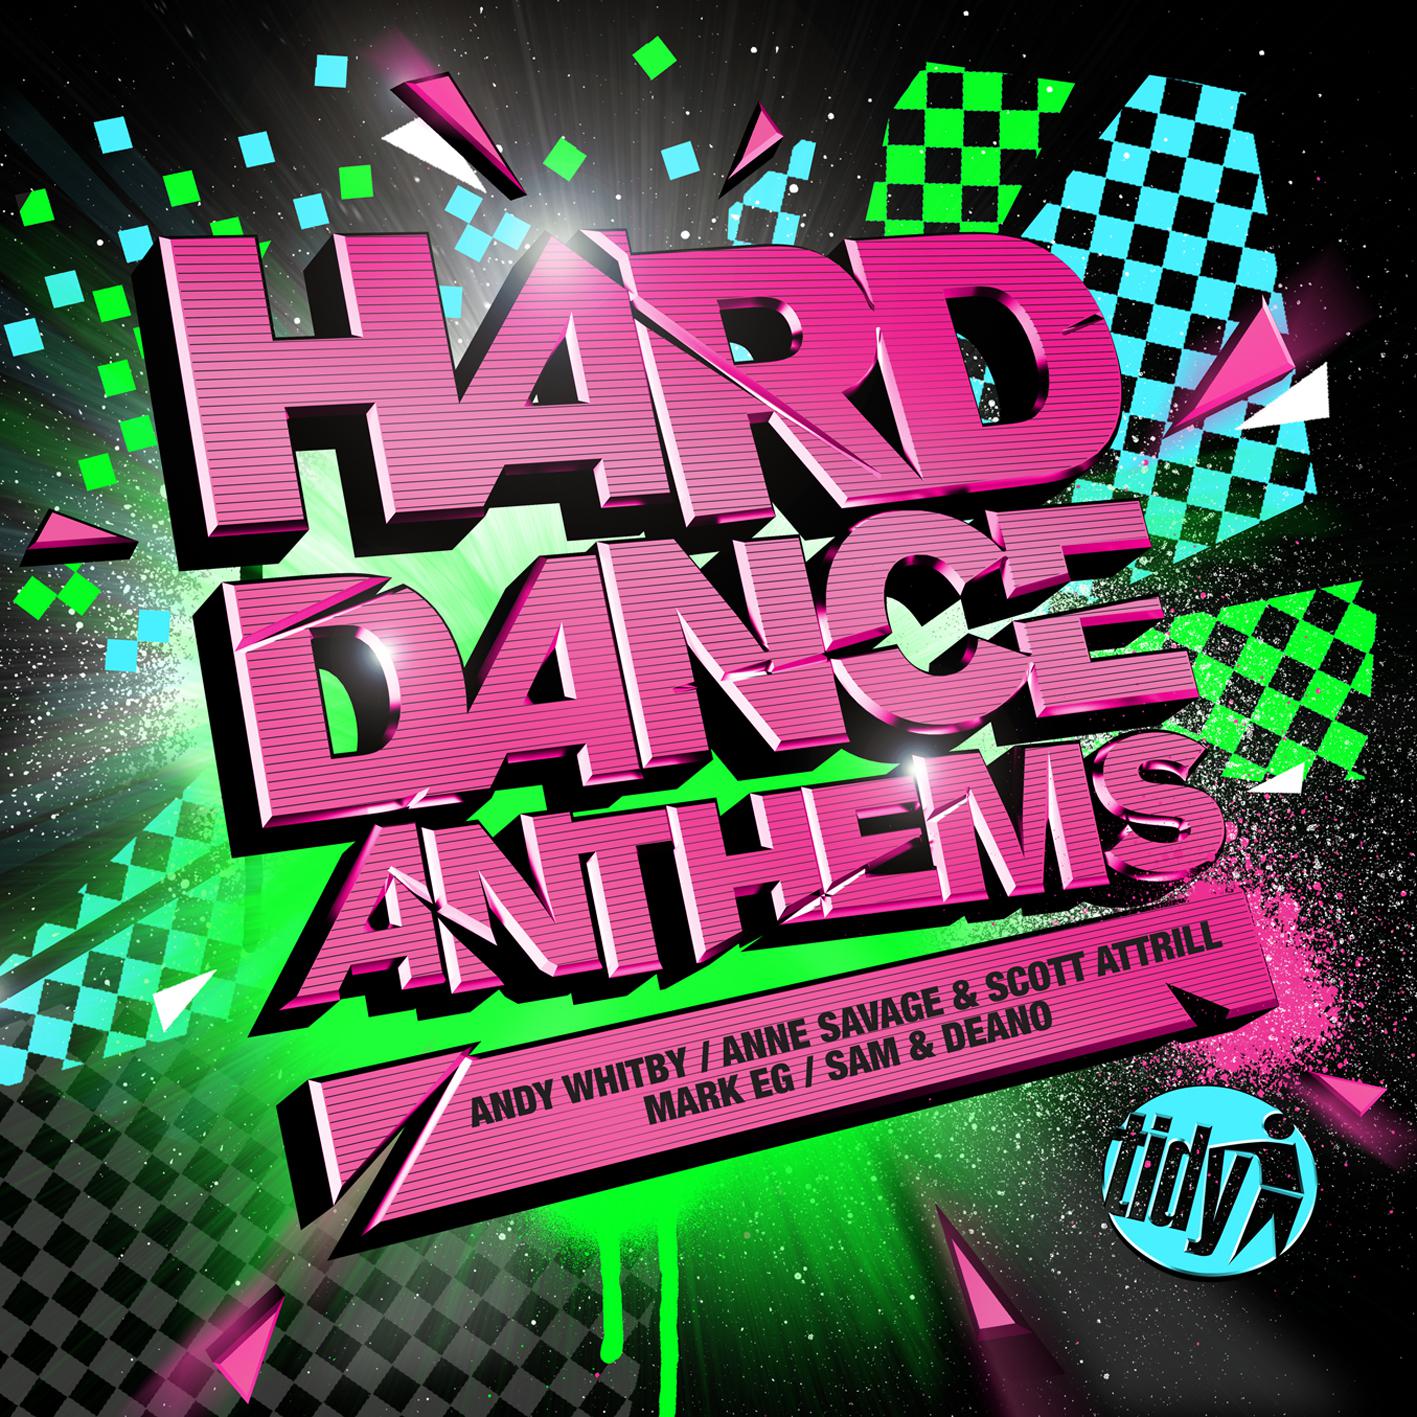 Hard Dance Anthems - Mixed By Andy Whitby, Anne Savage & Scott Attrill, Mark EG, Sam & Deano